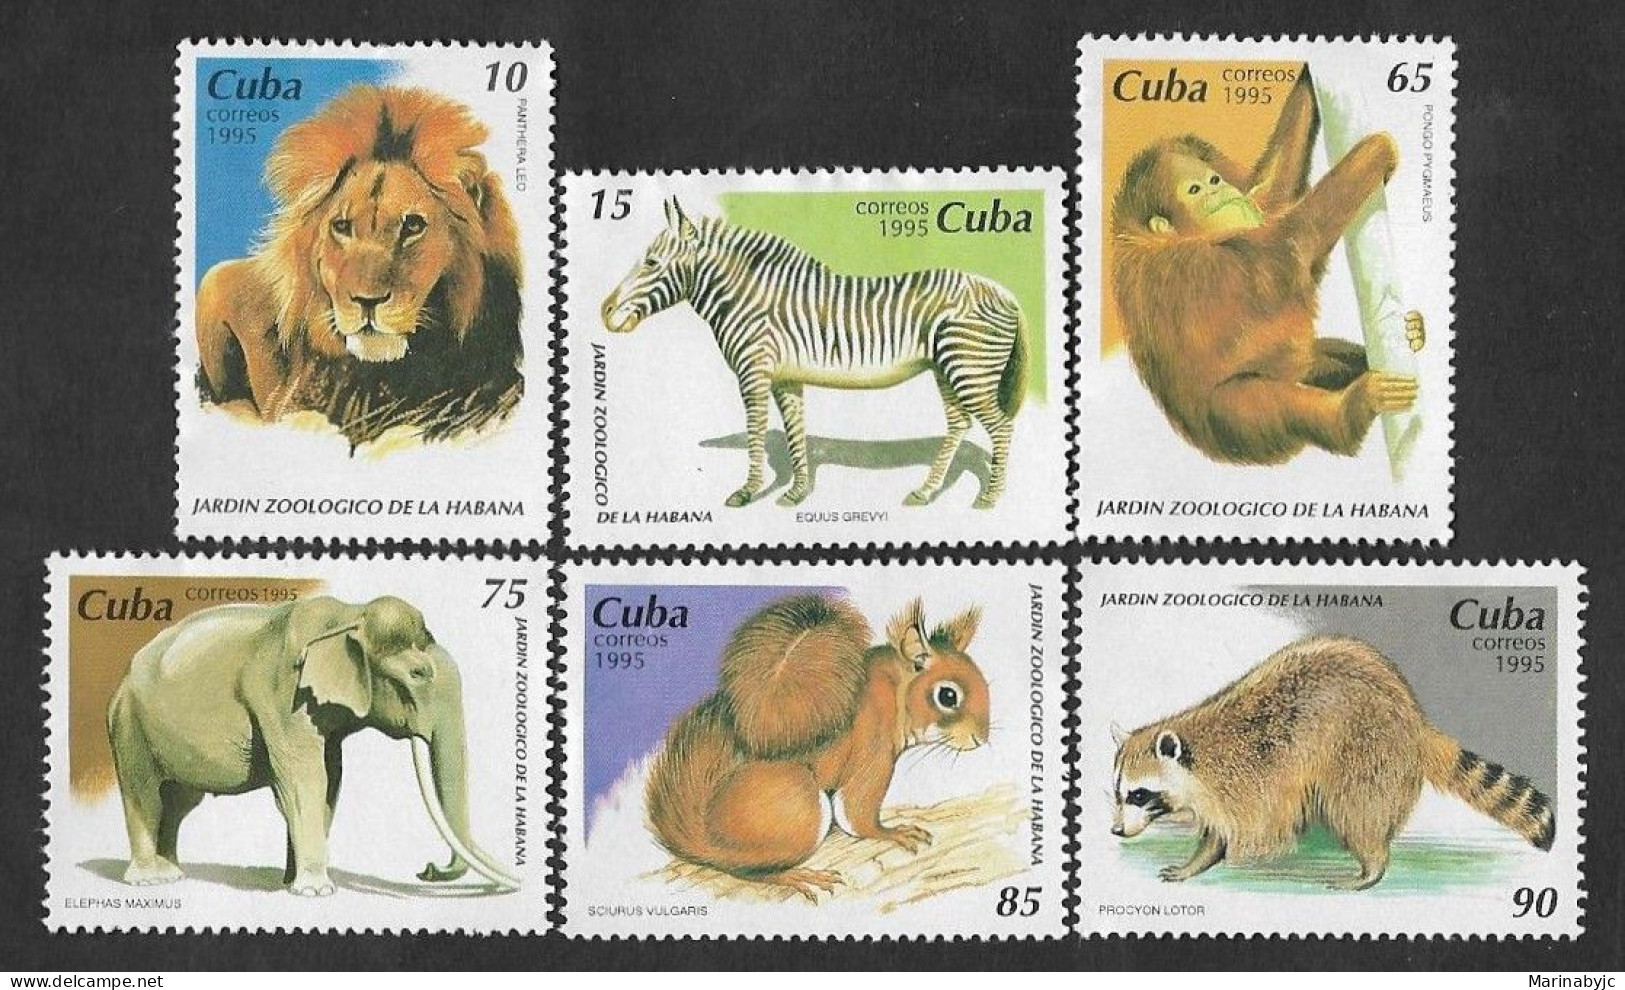 SE)1995 CUBA, ANIMALS OF THE HAVANA ZOOLOGICAL GARDEN, 6 STAMPS MNH - Nuevos